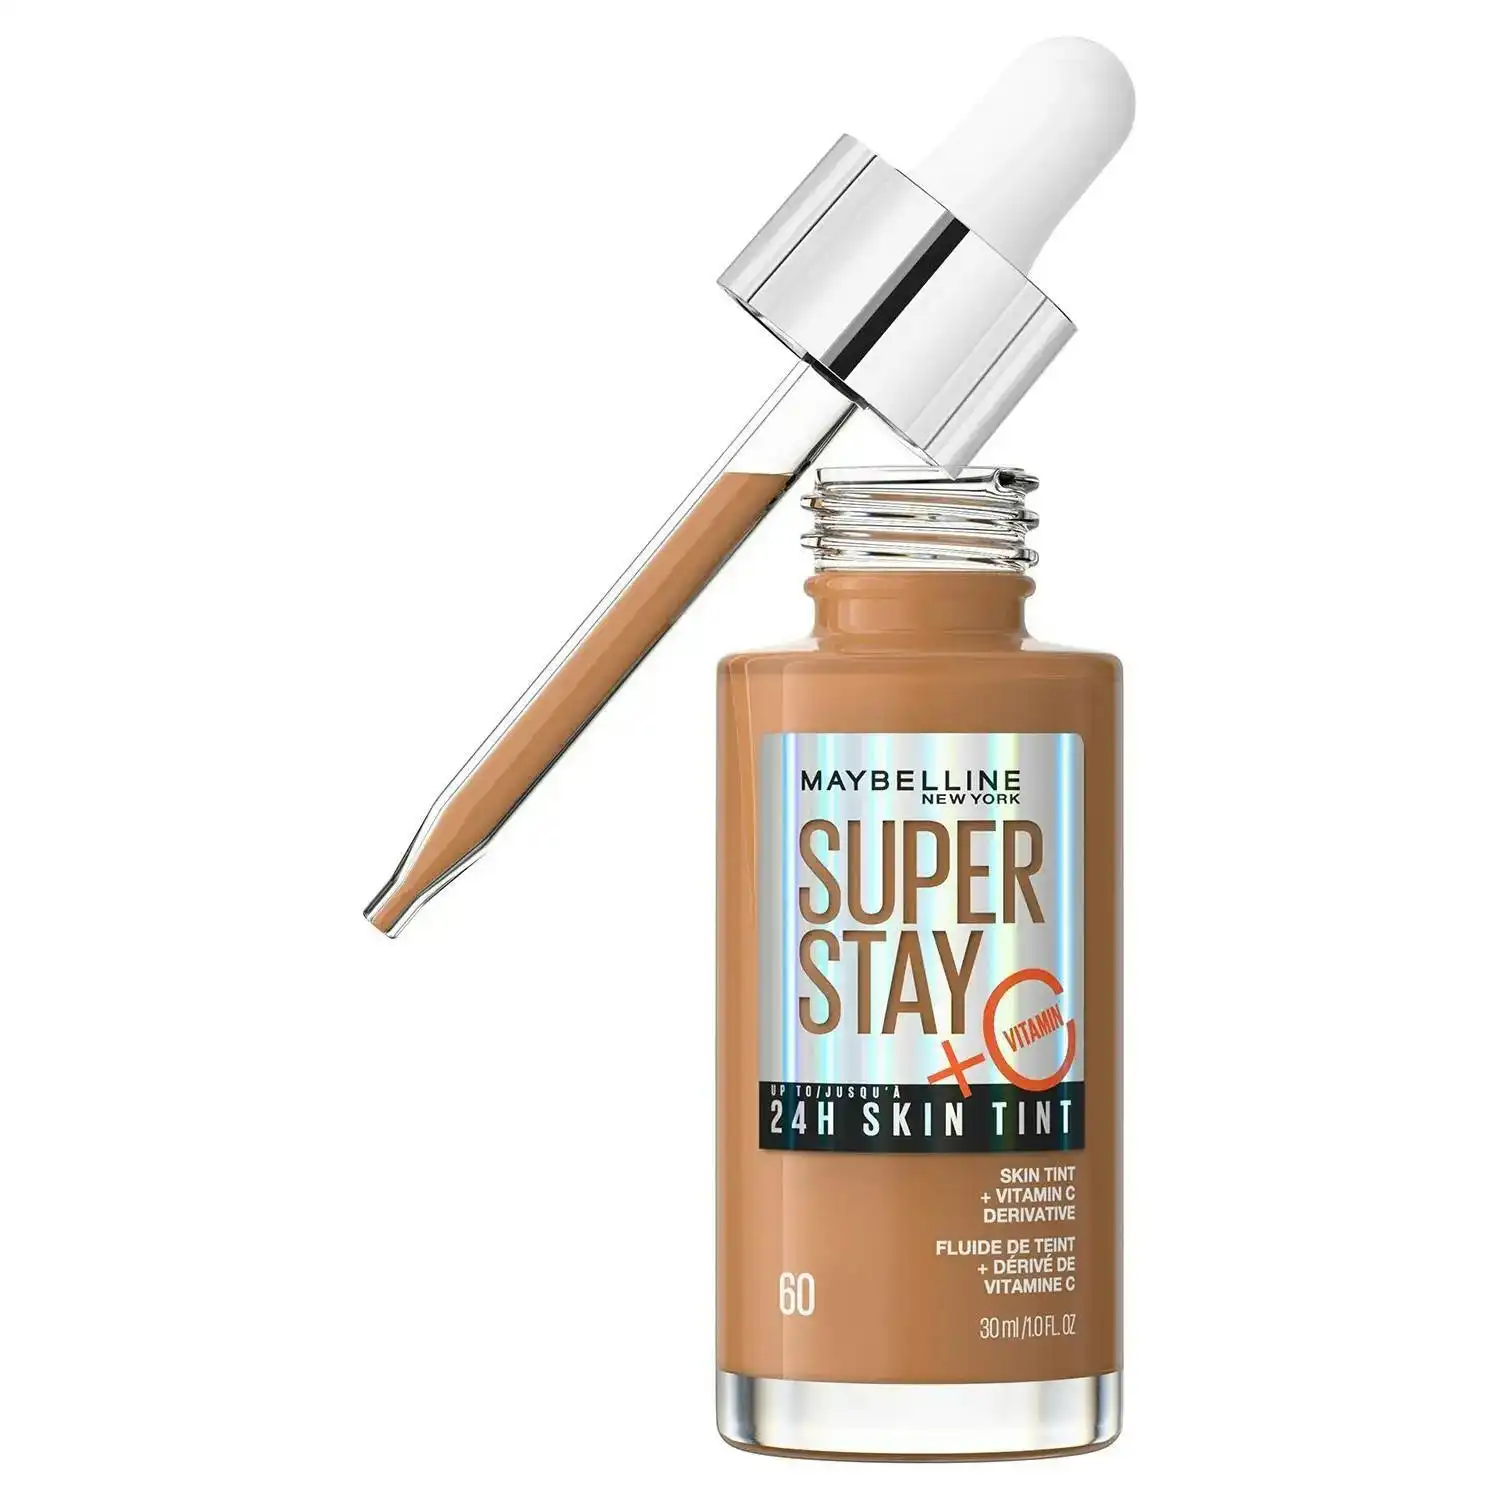 Maybeline Maybelline Super Stay 24h Skin Tint Foundation With Vitamin C Shade 60